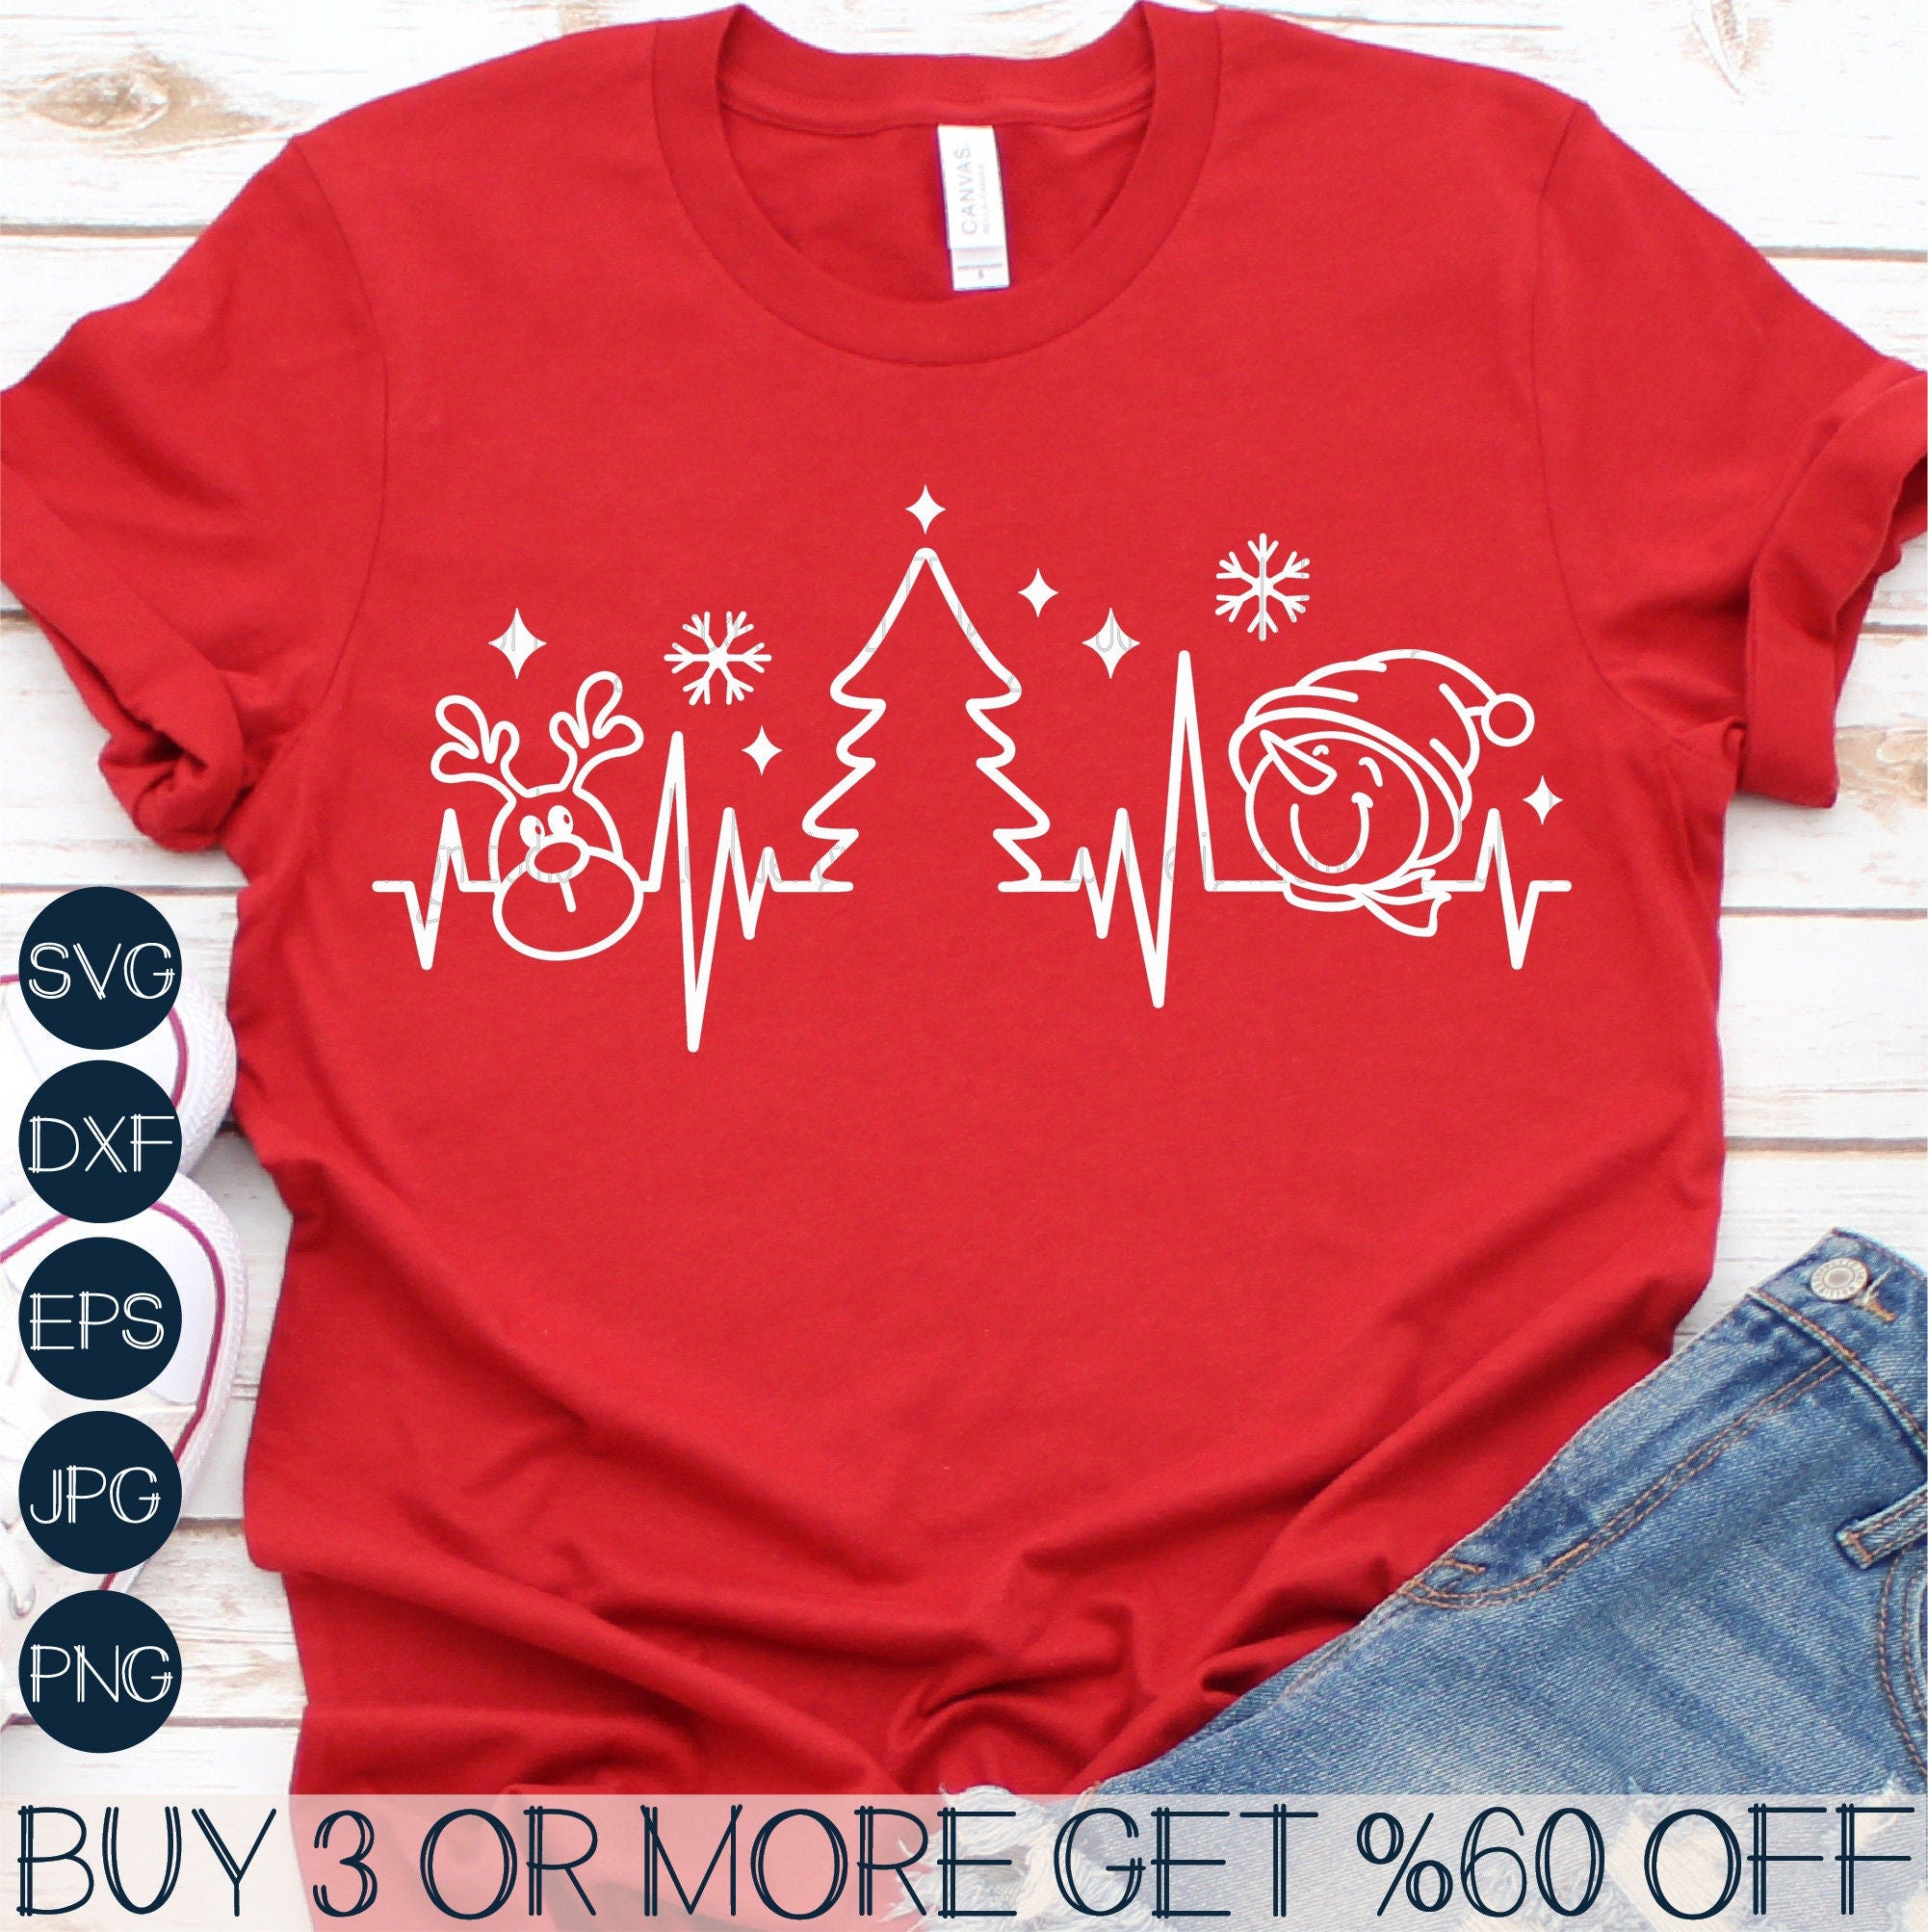 Christmas Heartbeat SVG, Snowman SVG, Christmas Tree SVG, Funny Christmas Svg, Reindeer Png, Files for Cricut, Sublimation Designs Downloads